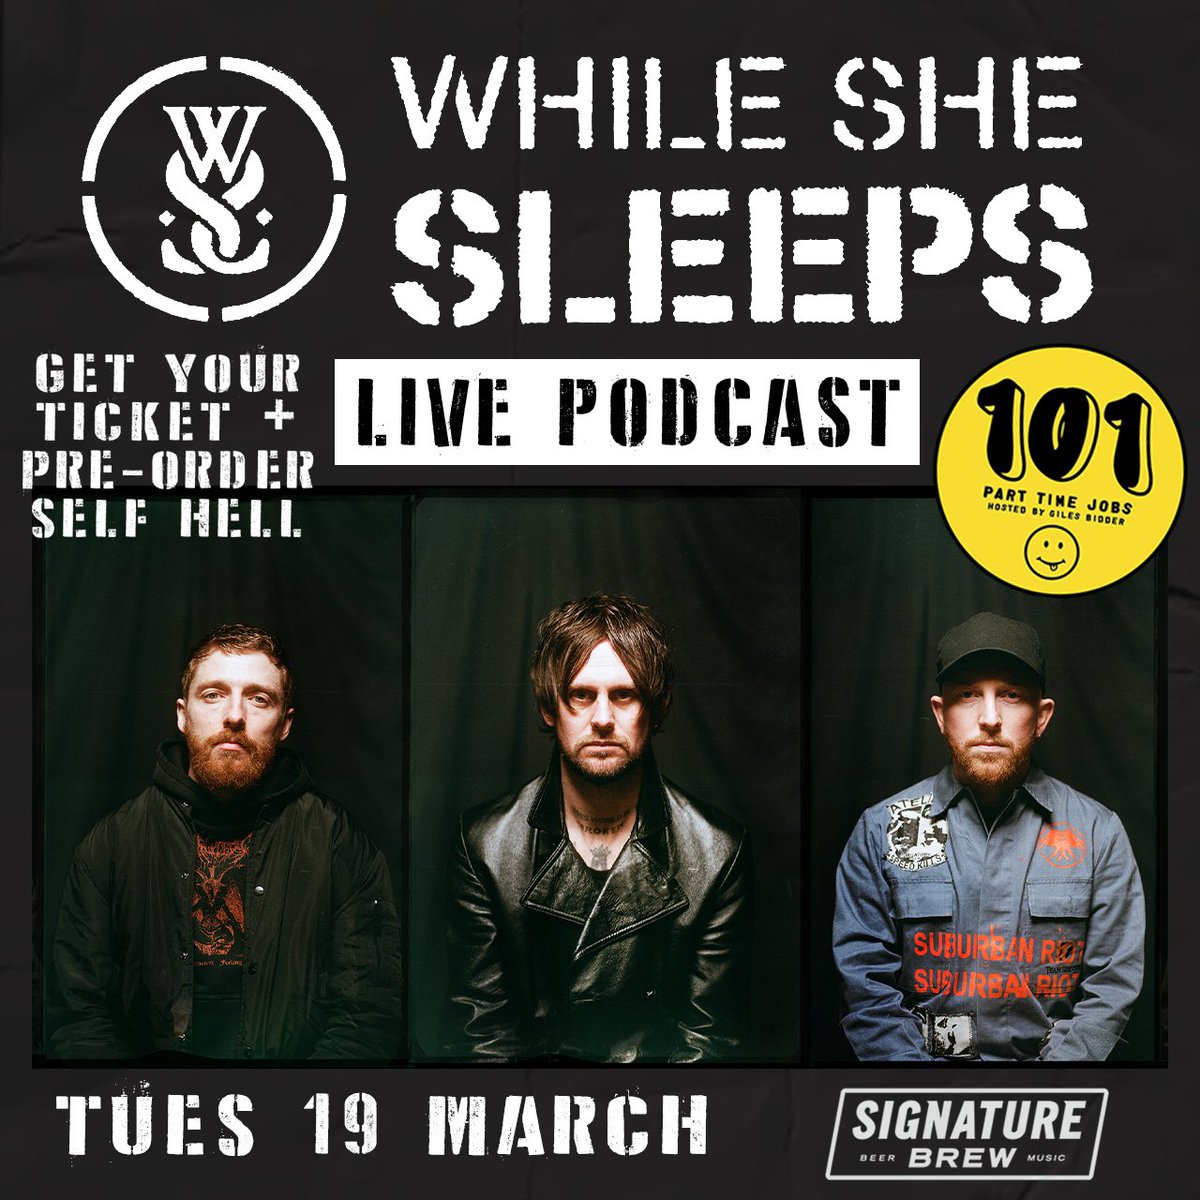 NEW LIVE PODCAST @WHILESHESLEEPS 🚨 Lawrence, Mat and Sean from the band will join Giles at @signaturebrewbh on 19 March, talking about how While She Sleeps have built their own world Get your podcast tickets and pre-order SELF HELL via @RoughTrade 👉 101parttimejobs.com/live